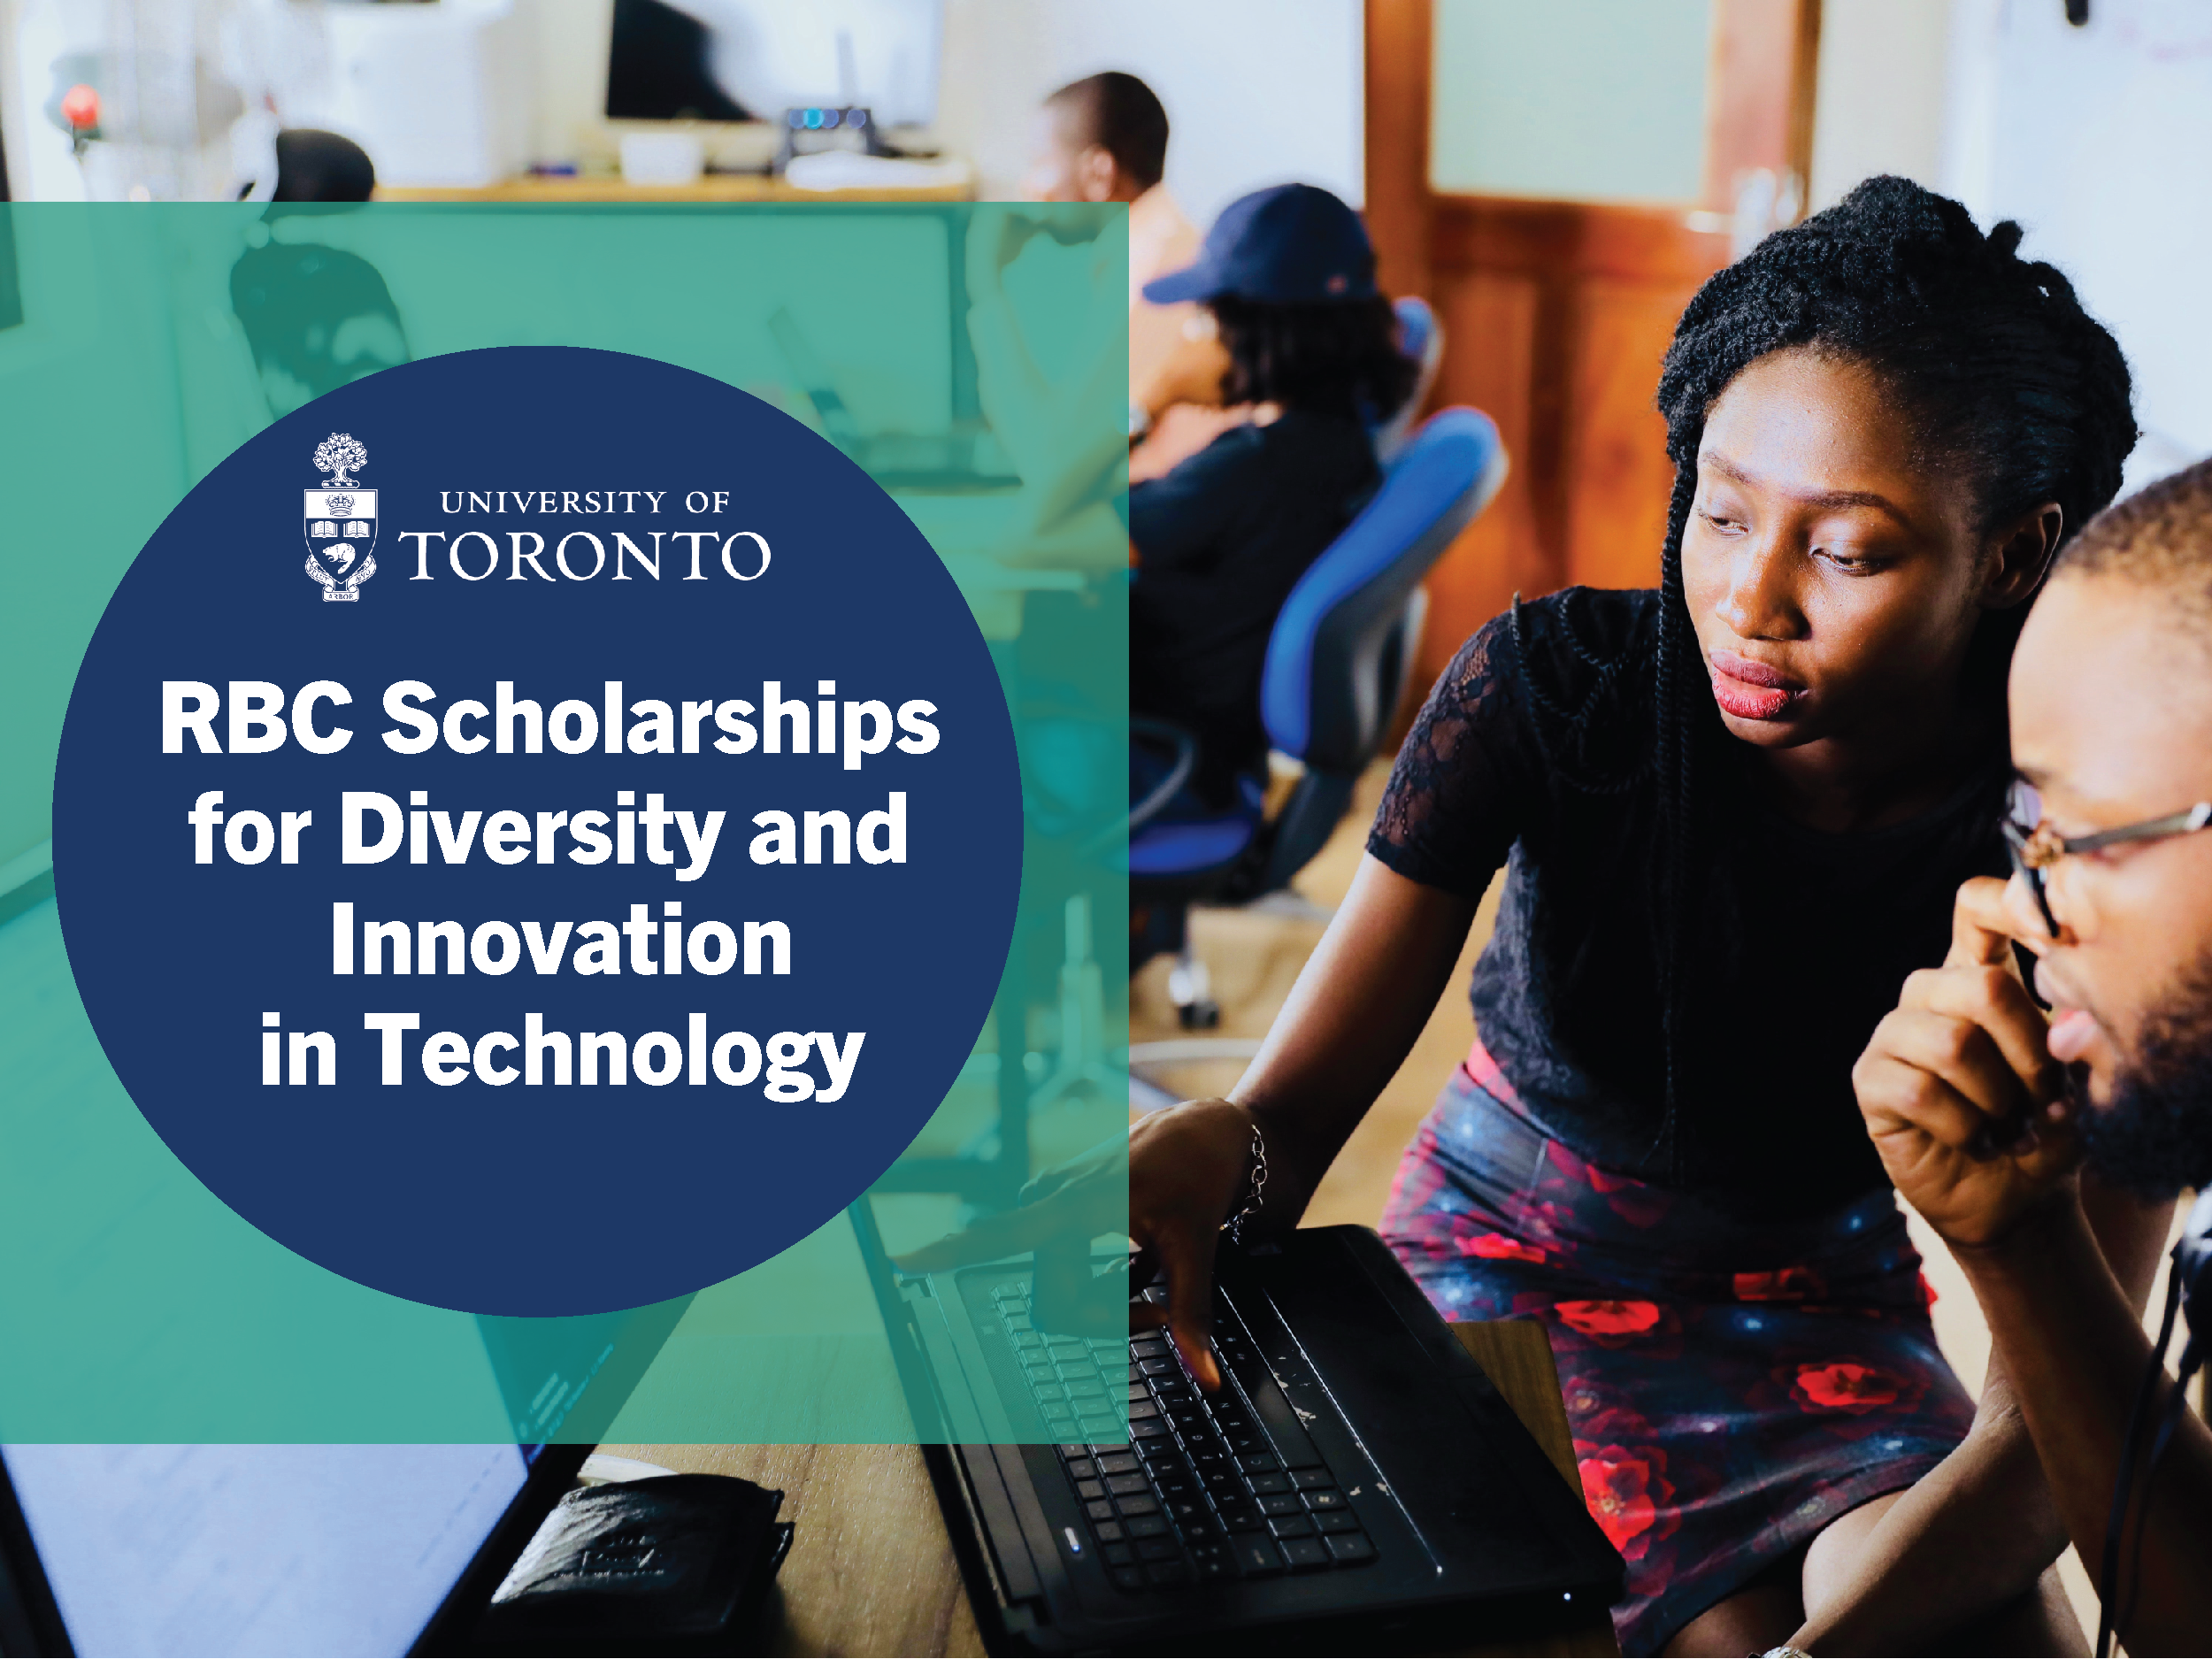 RBC Scholarships for Diversity and Innovation in Technology